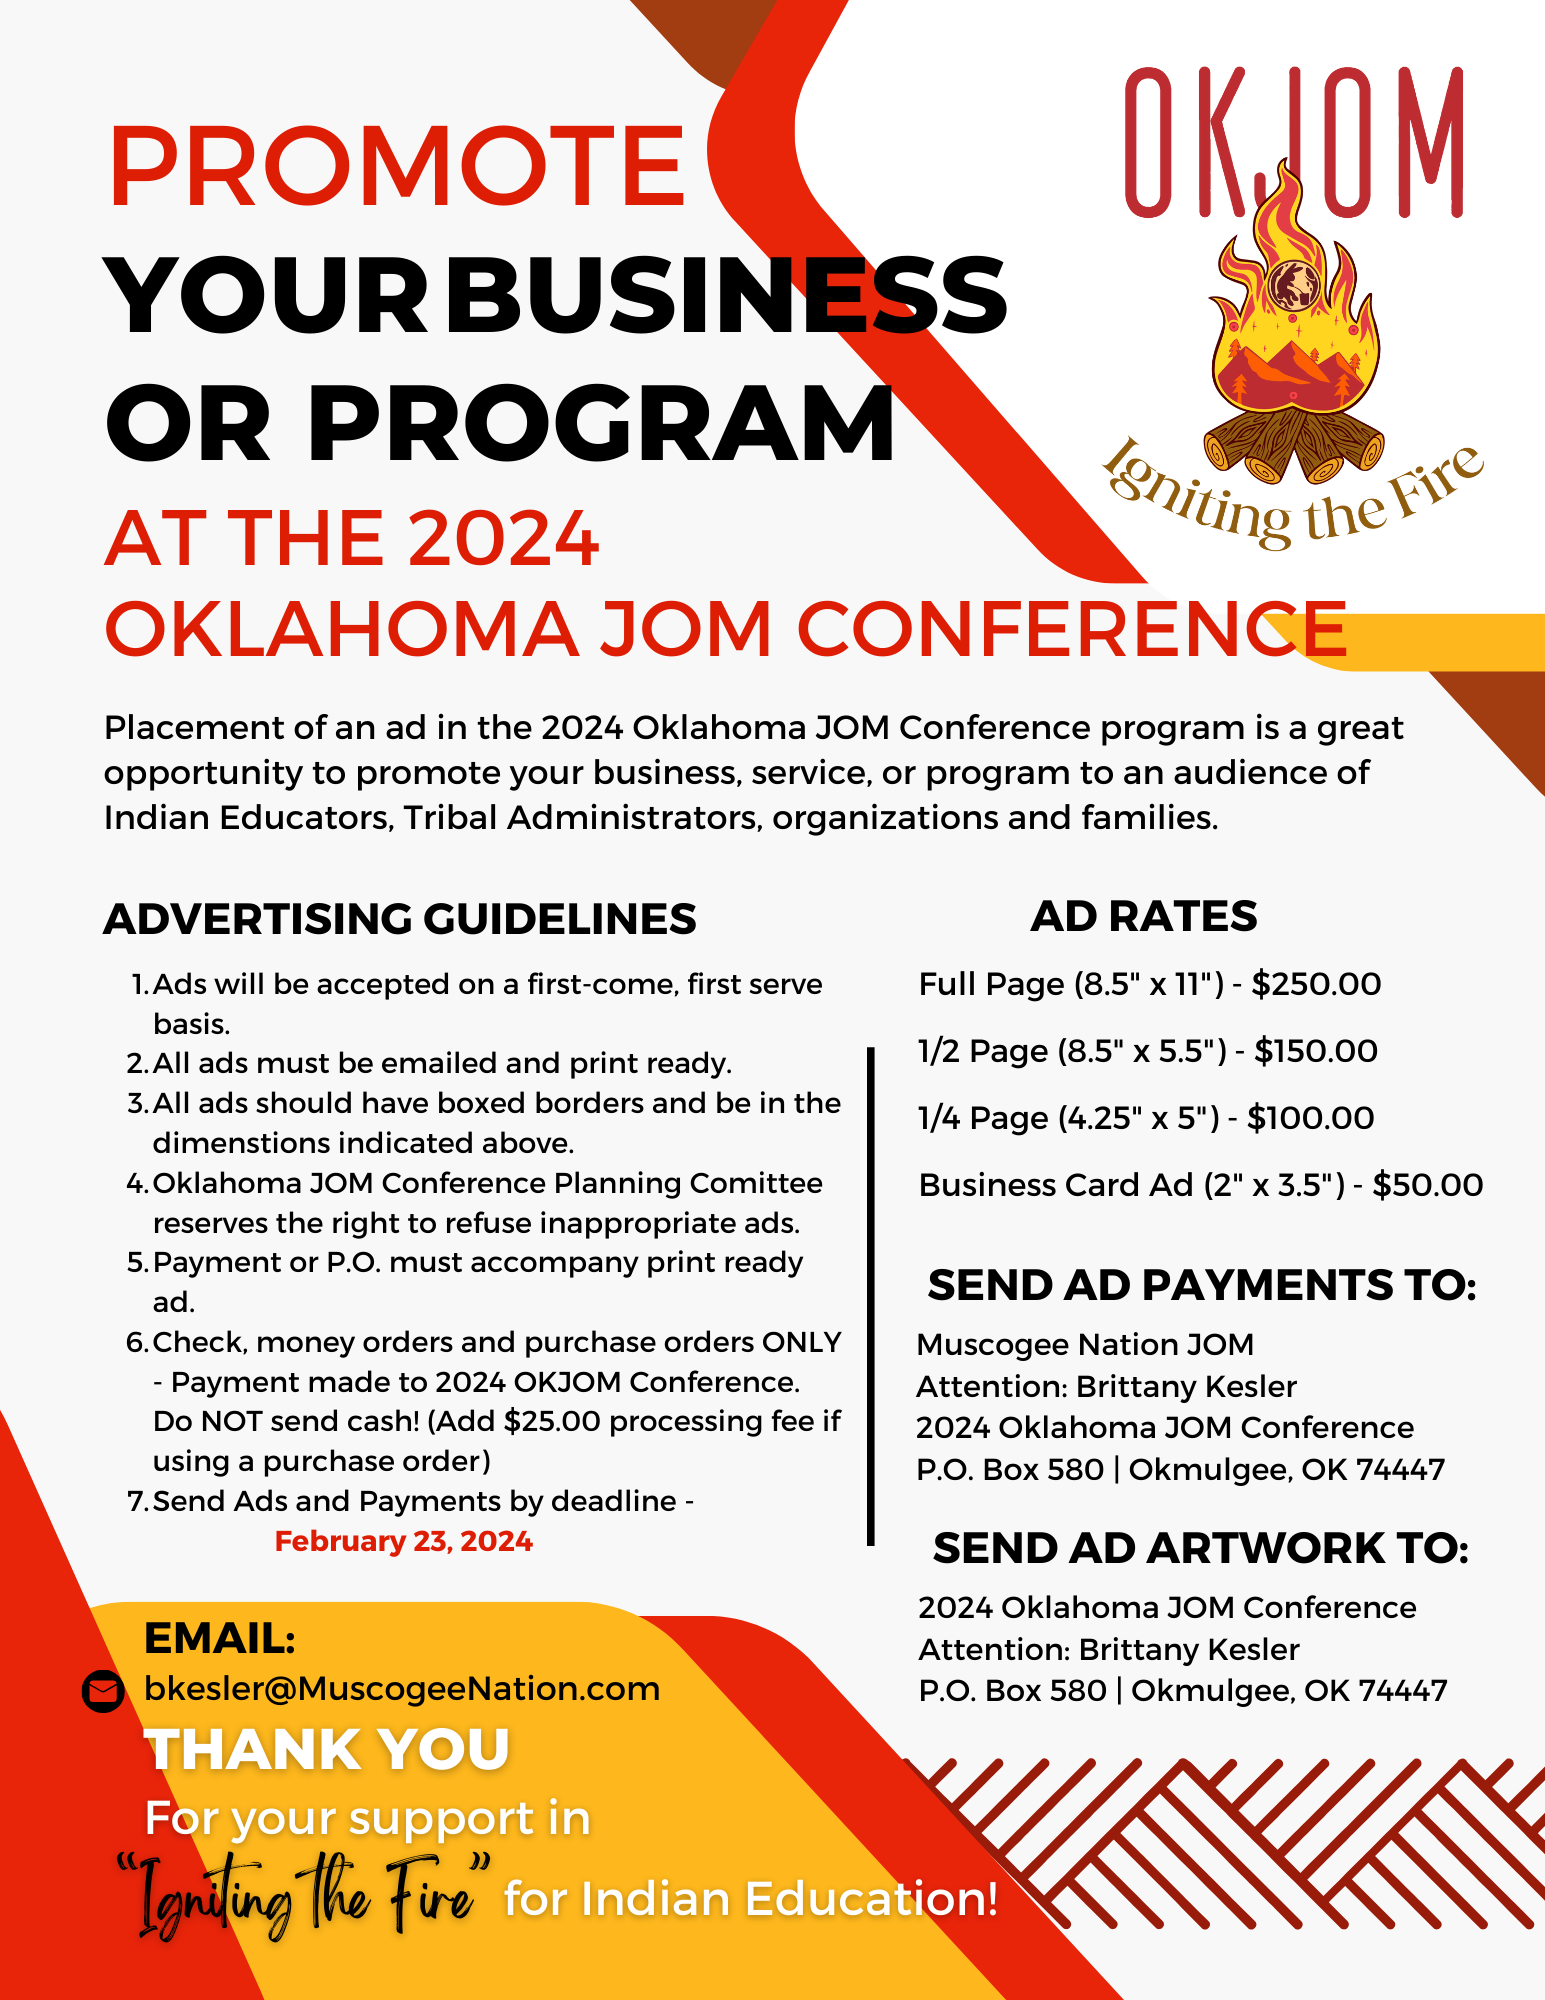 Promote Your Business or Program at 2024 JOM Conference The Muscogee